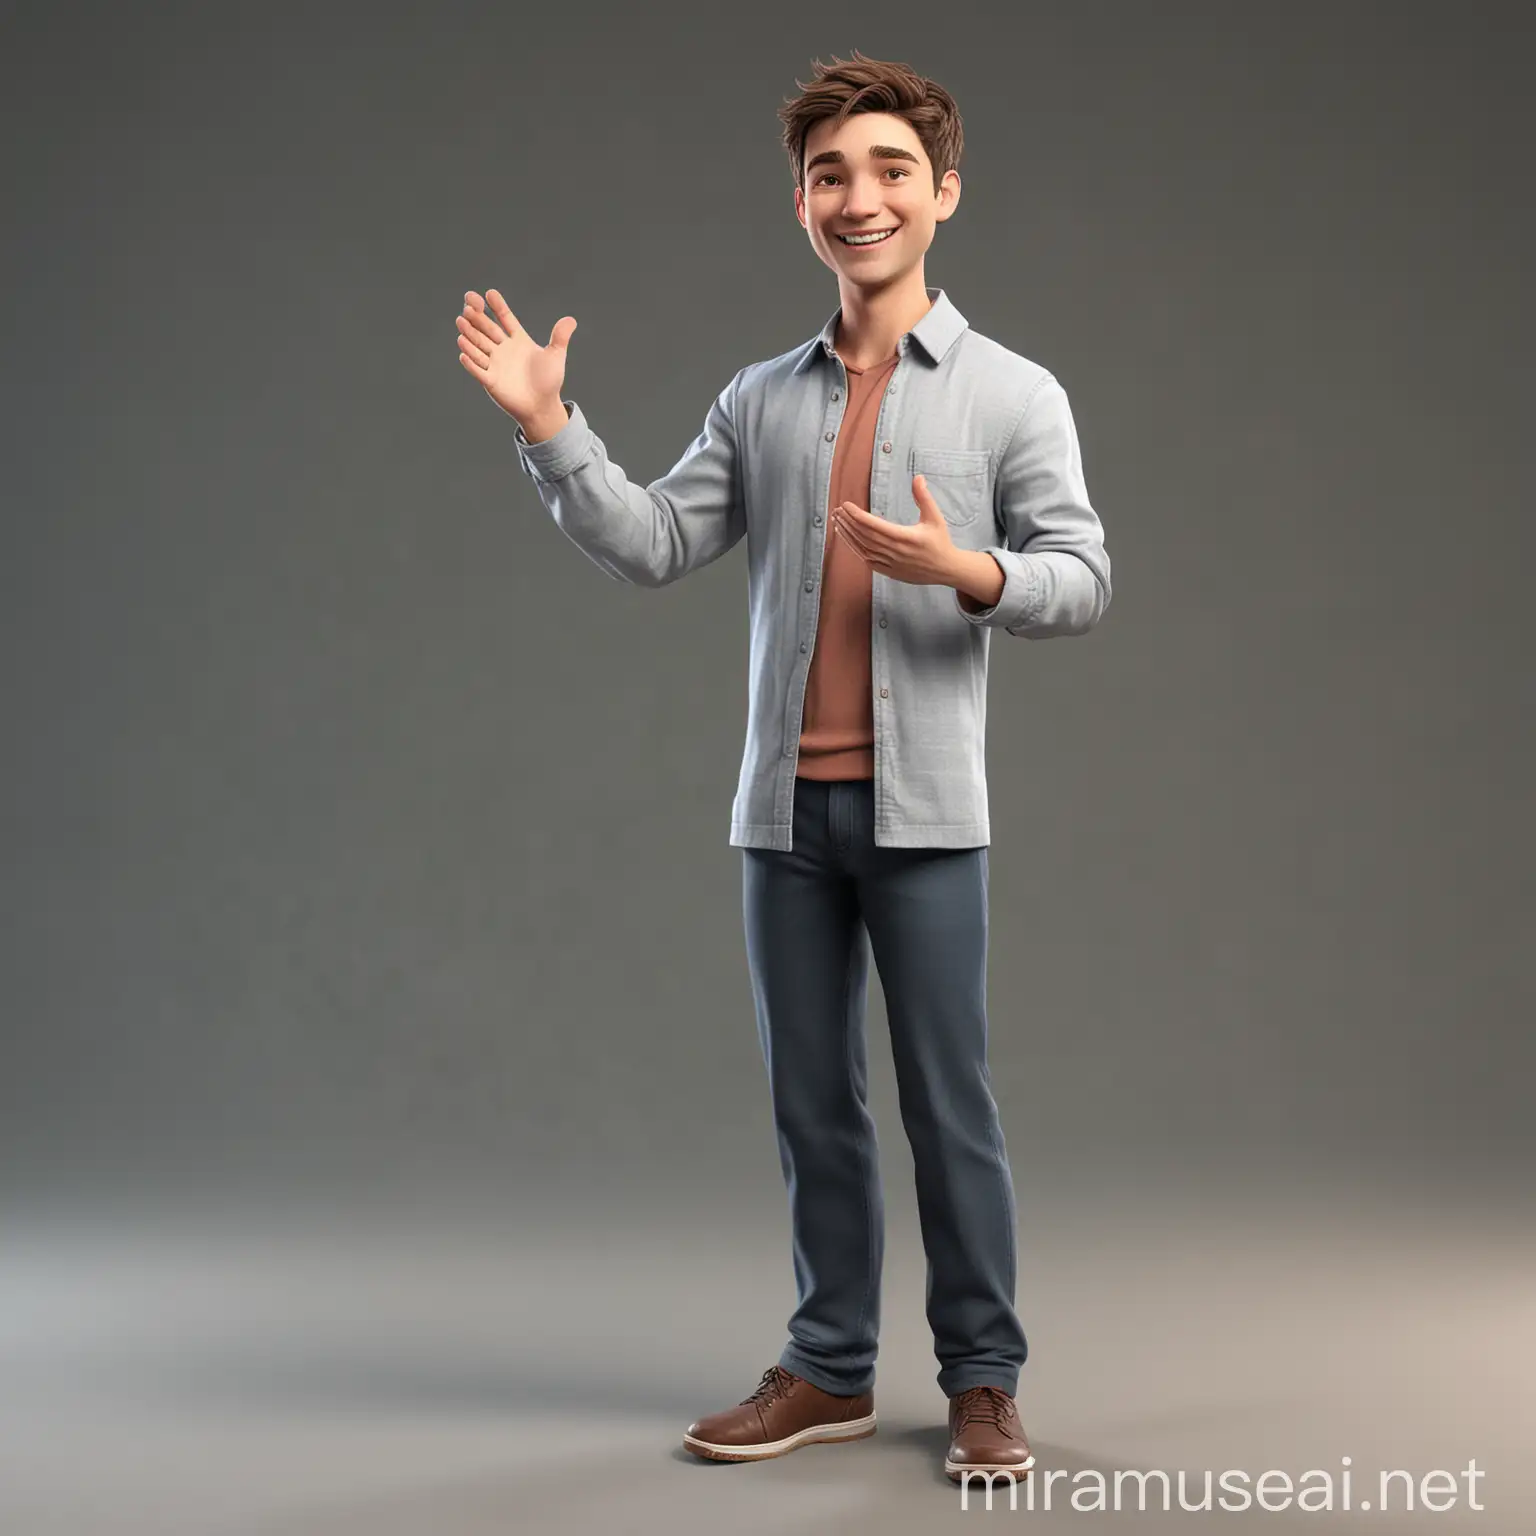 A full-body image of a polite, clapping, and smiling man in his twenties, wearing comfortable clothing, depicted in a semi-chibi 3D style.